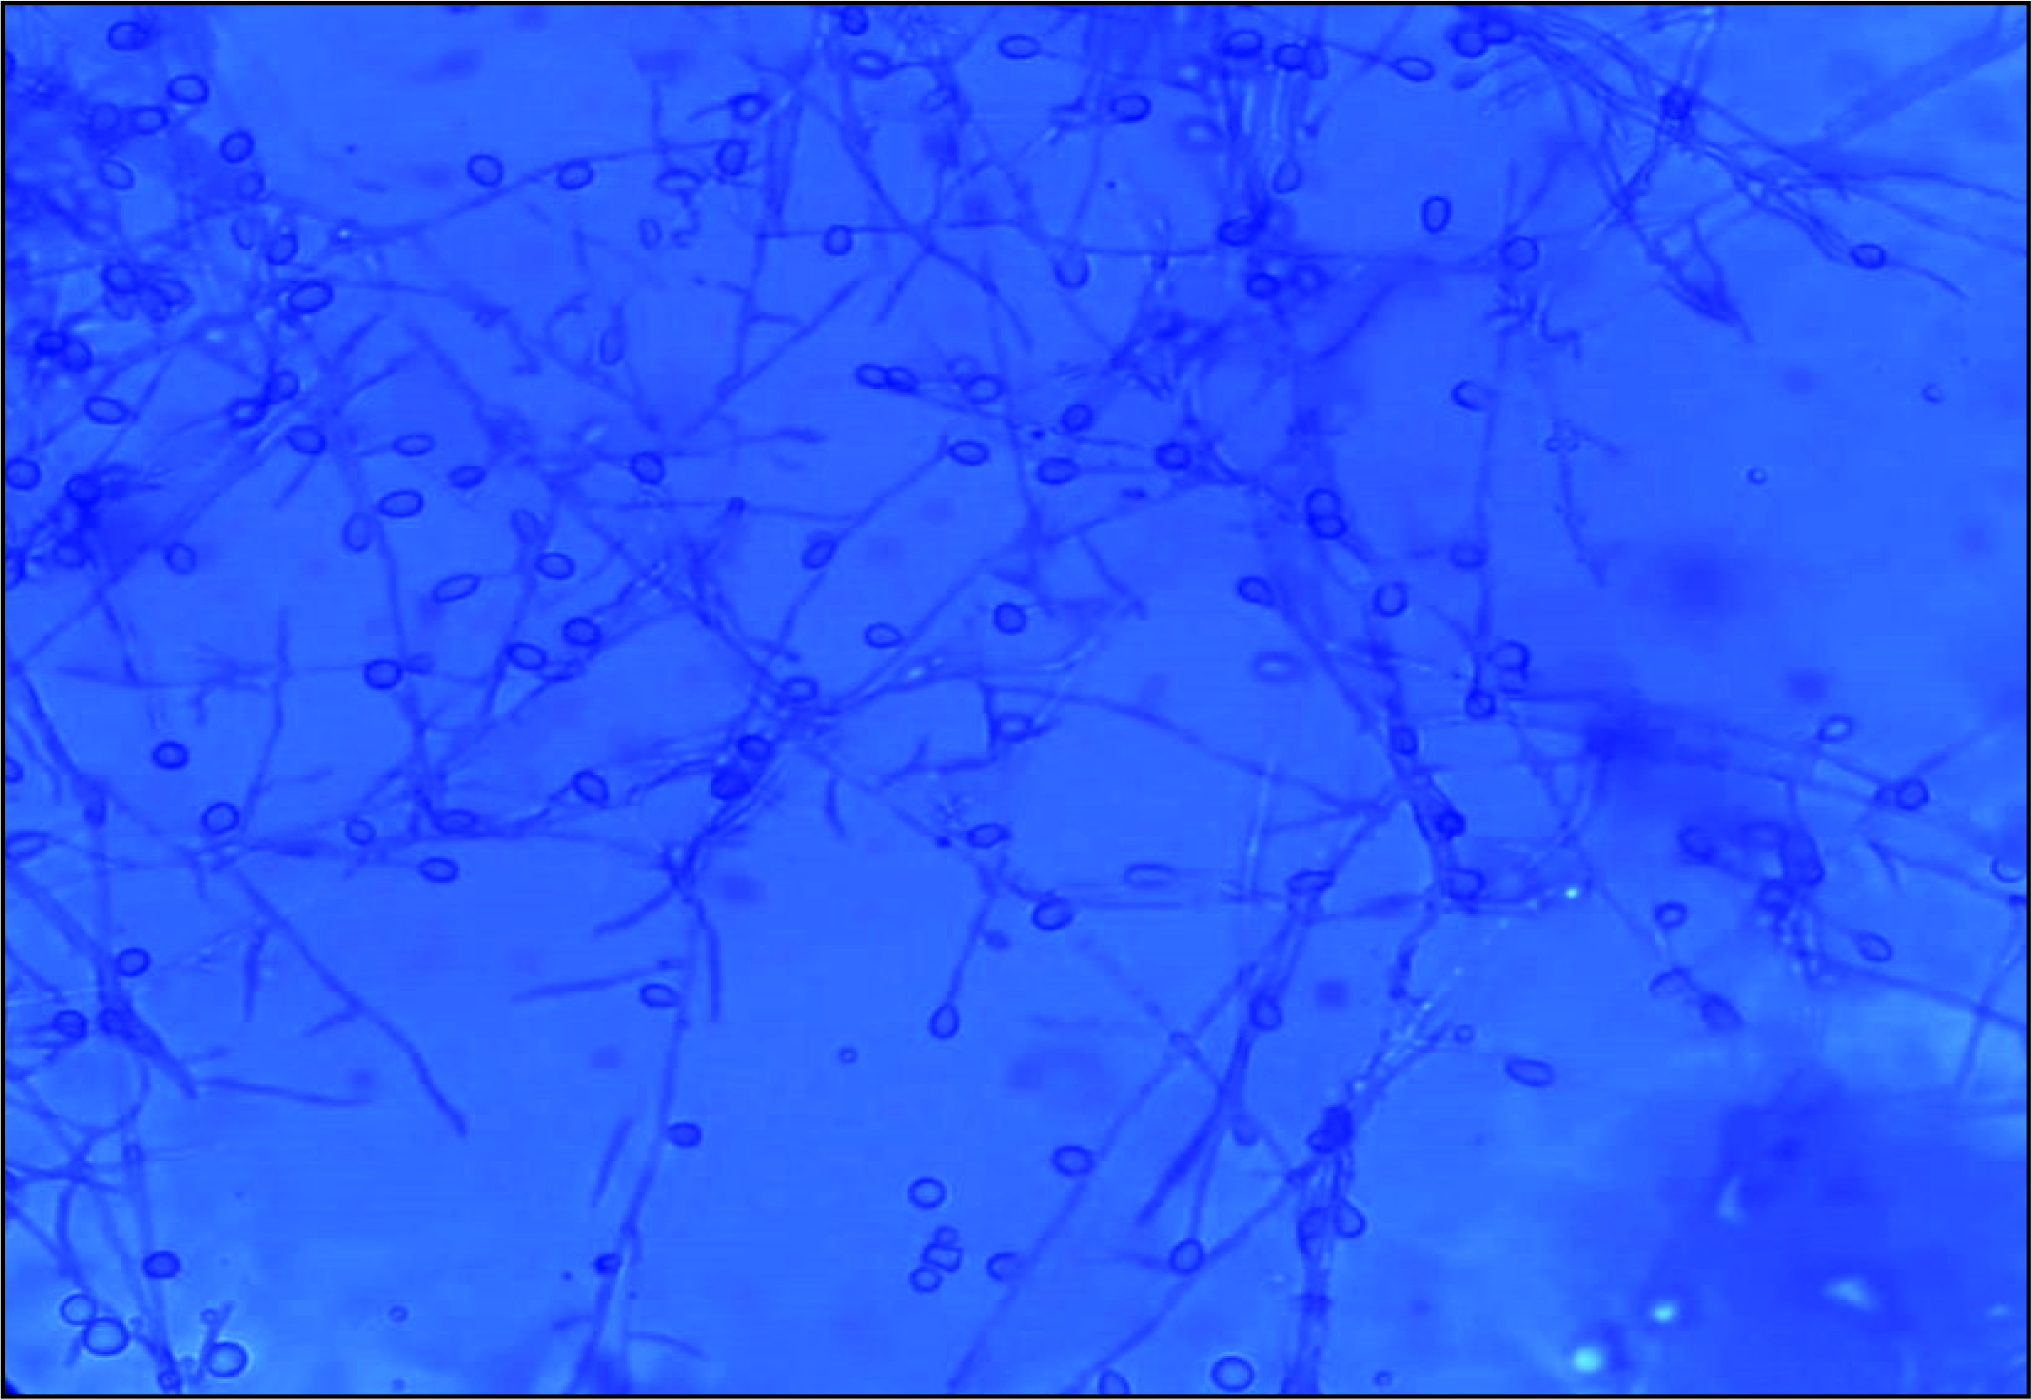 Microscopy with lactophenol cotton blue stain showing septate hyphae with clavate-shaped conidia.